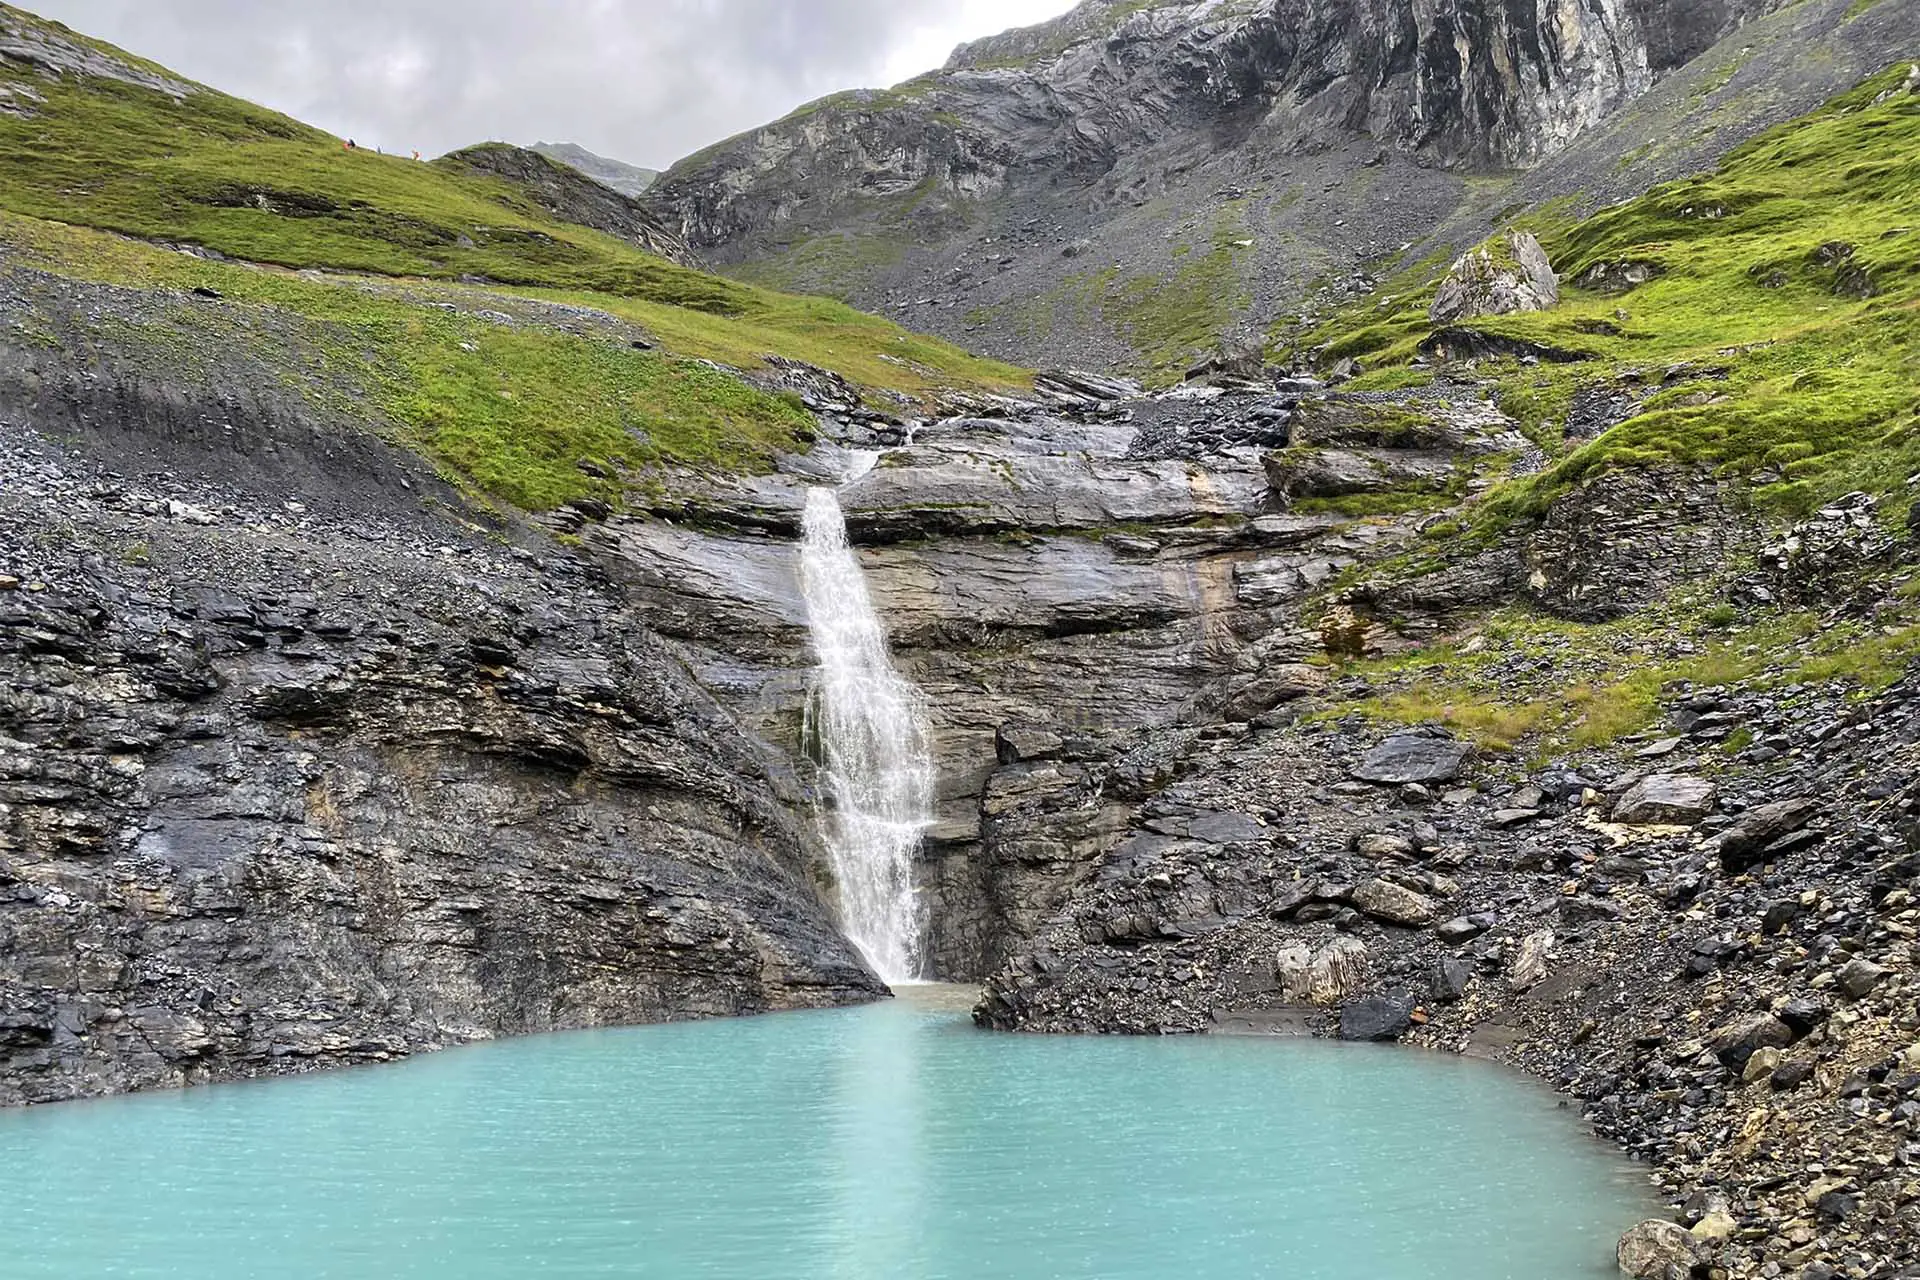 The Limmernsee Waterfall in the Swiss Alps.